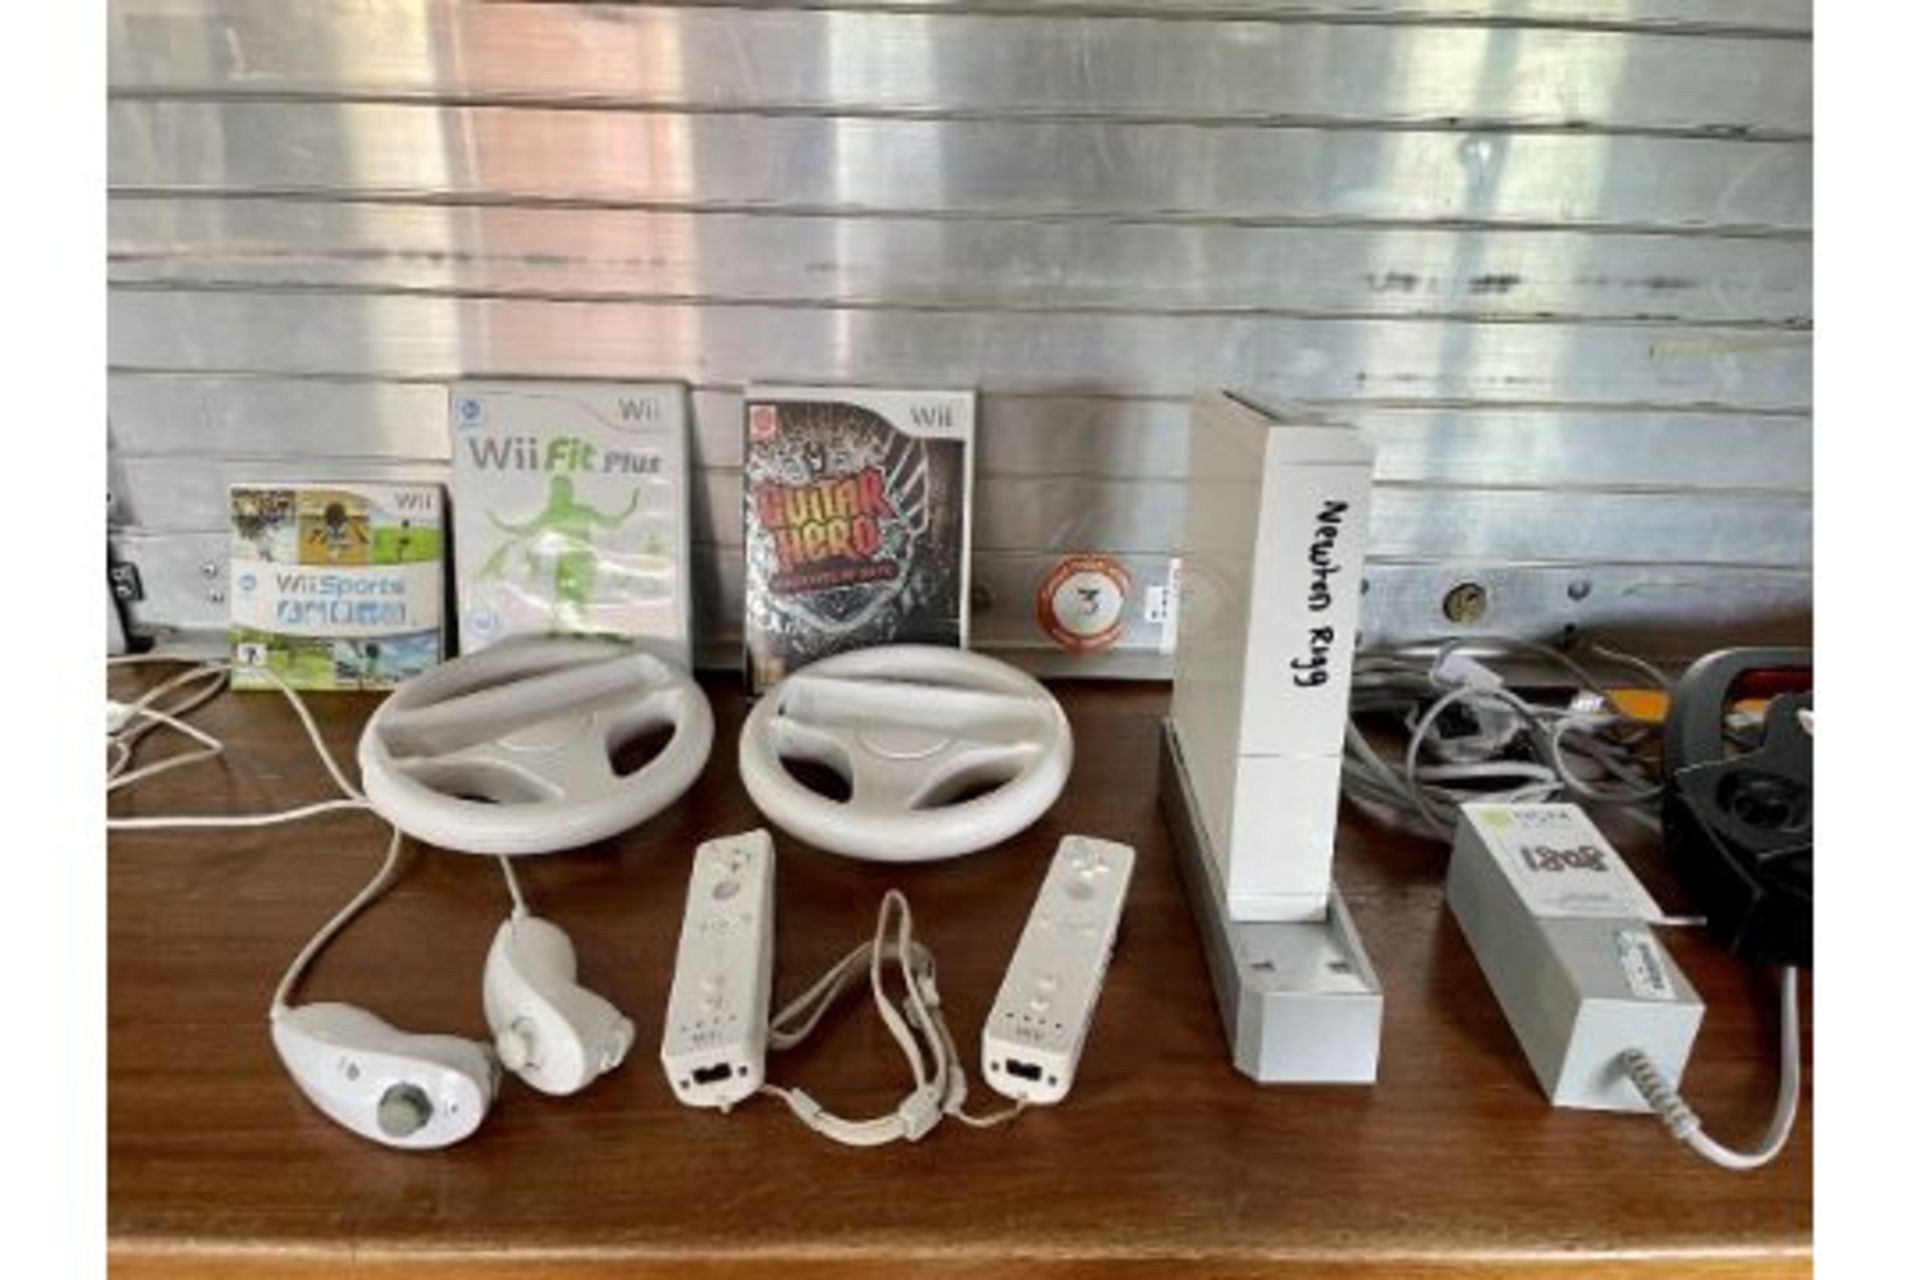 Nintendo Wii Games Console & Accessories - Image 3 of 3